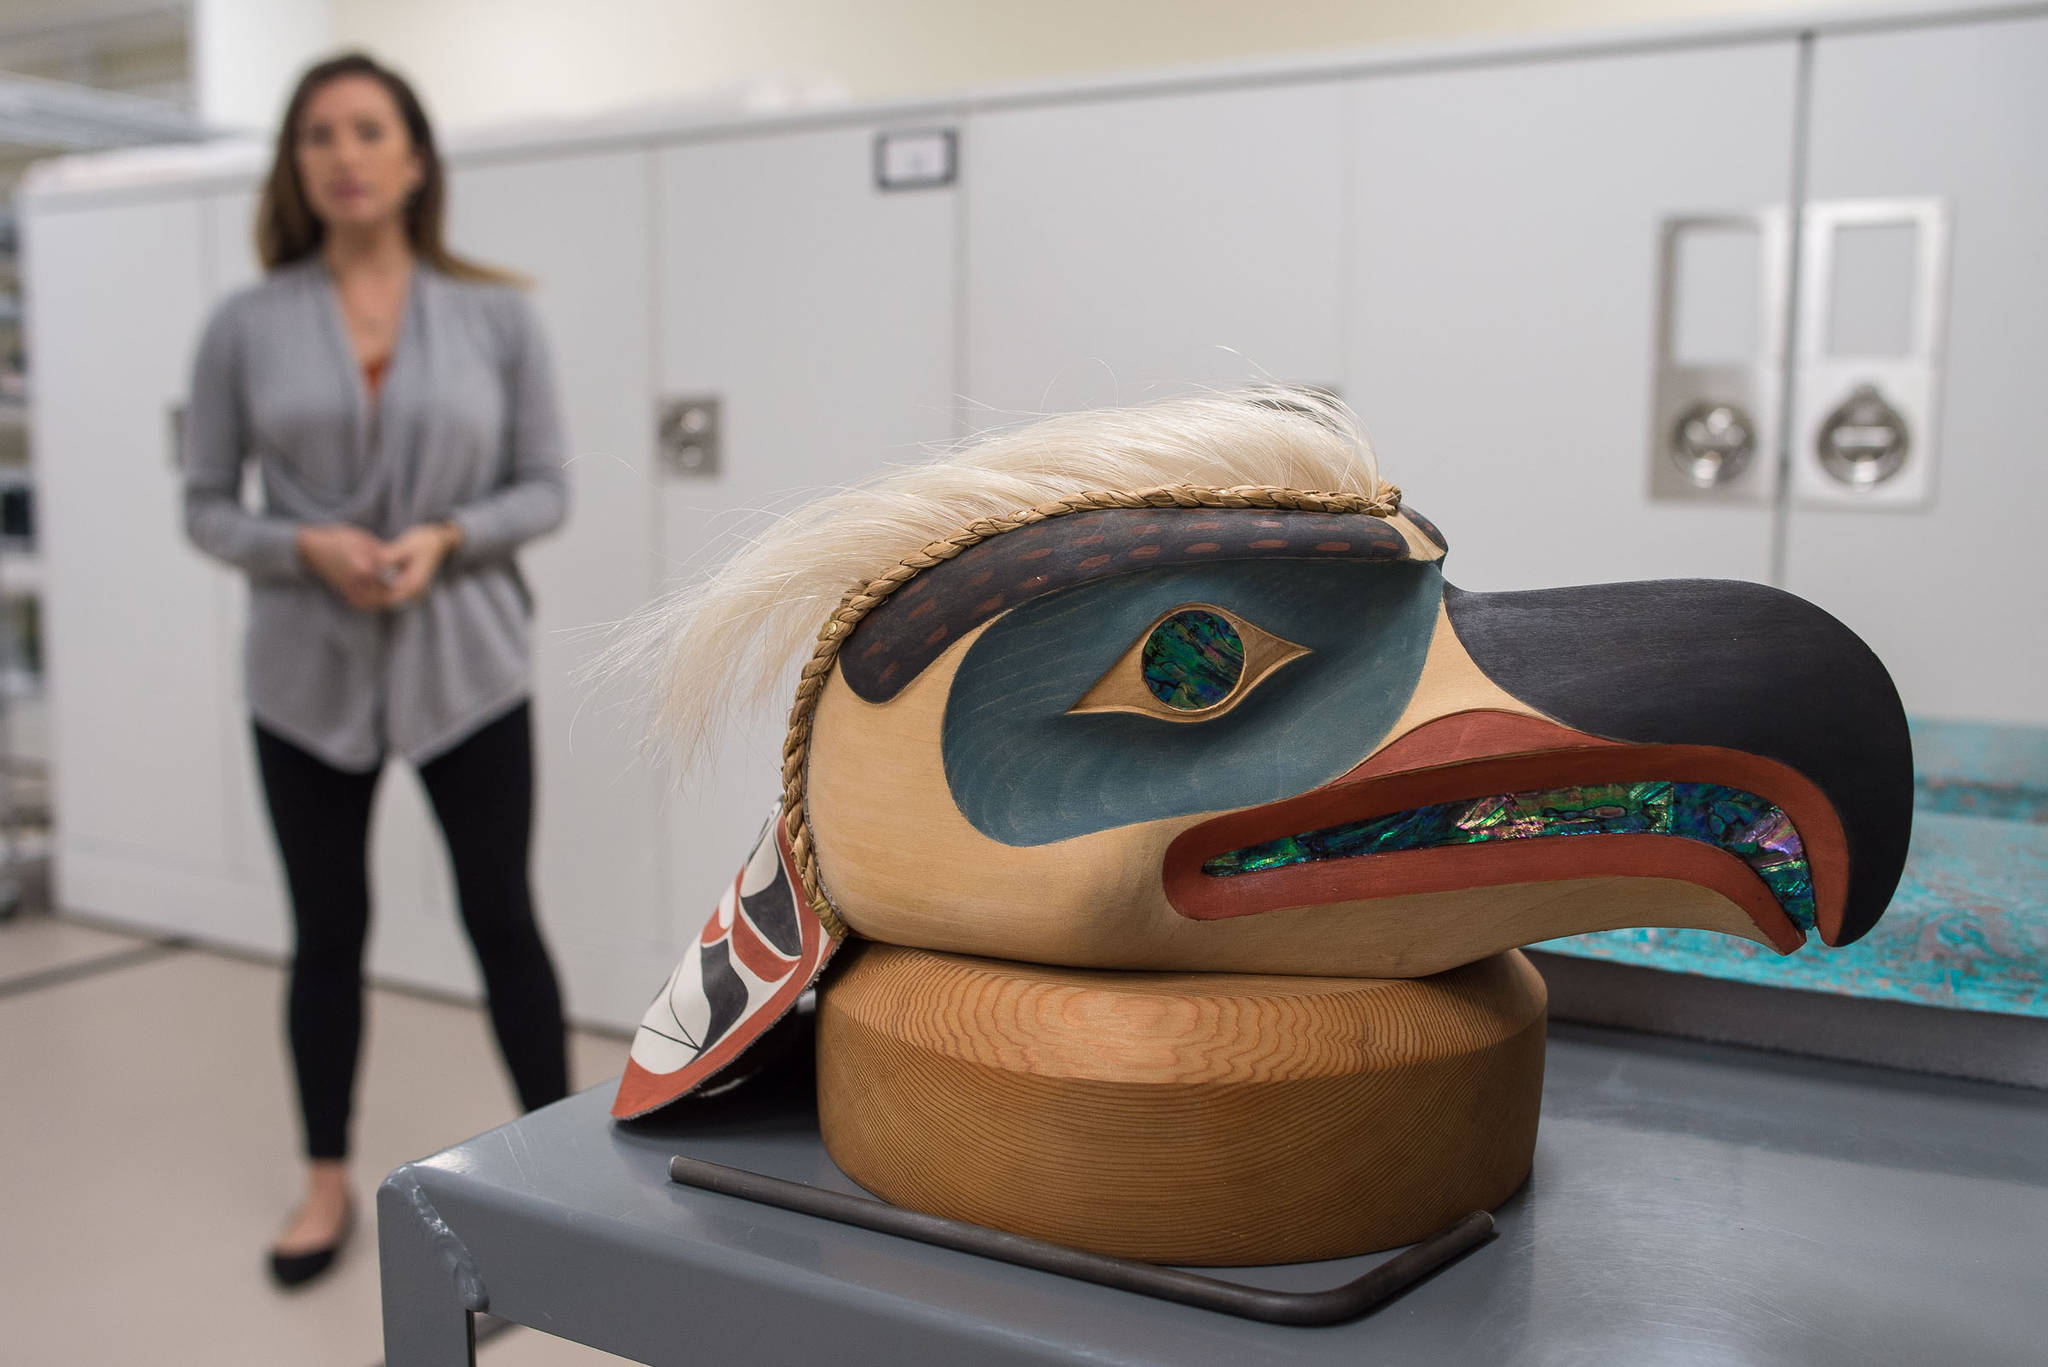 Coordinator Carmaleeda Estrada stands next to an eagle headdress by artist Duane Pasco at the Walter Soboleff Center on Wednesday, Sept. 27, 2017. The artwork is one of more than 50 pieces featured in Sealaska Heritage Institute’s second Tin&